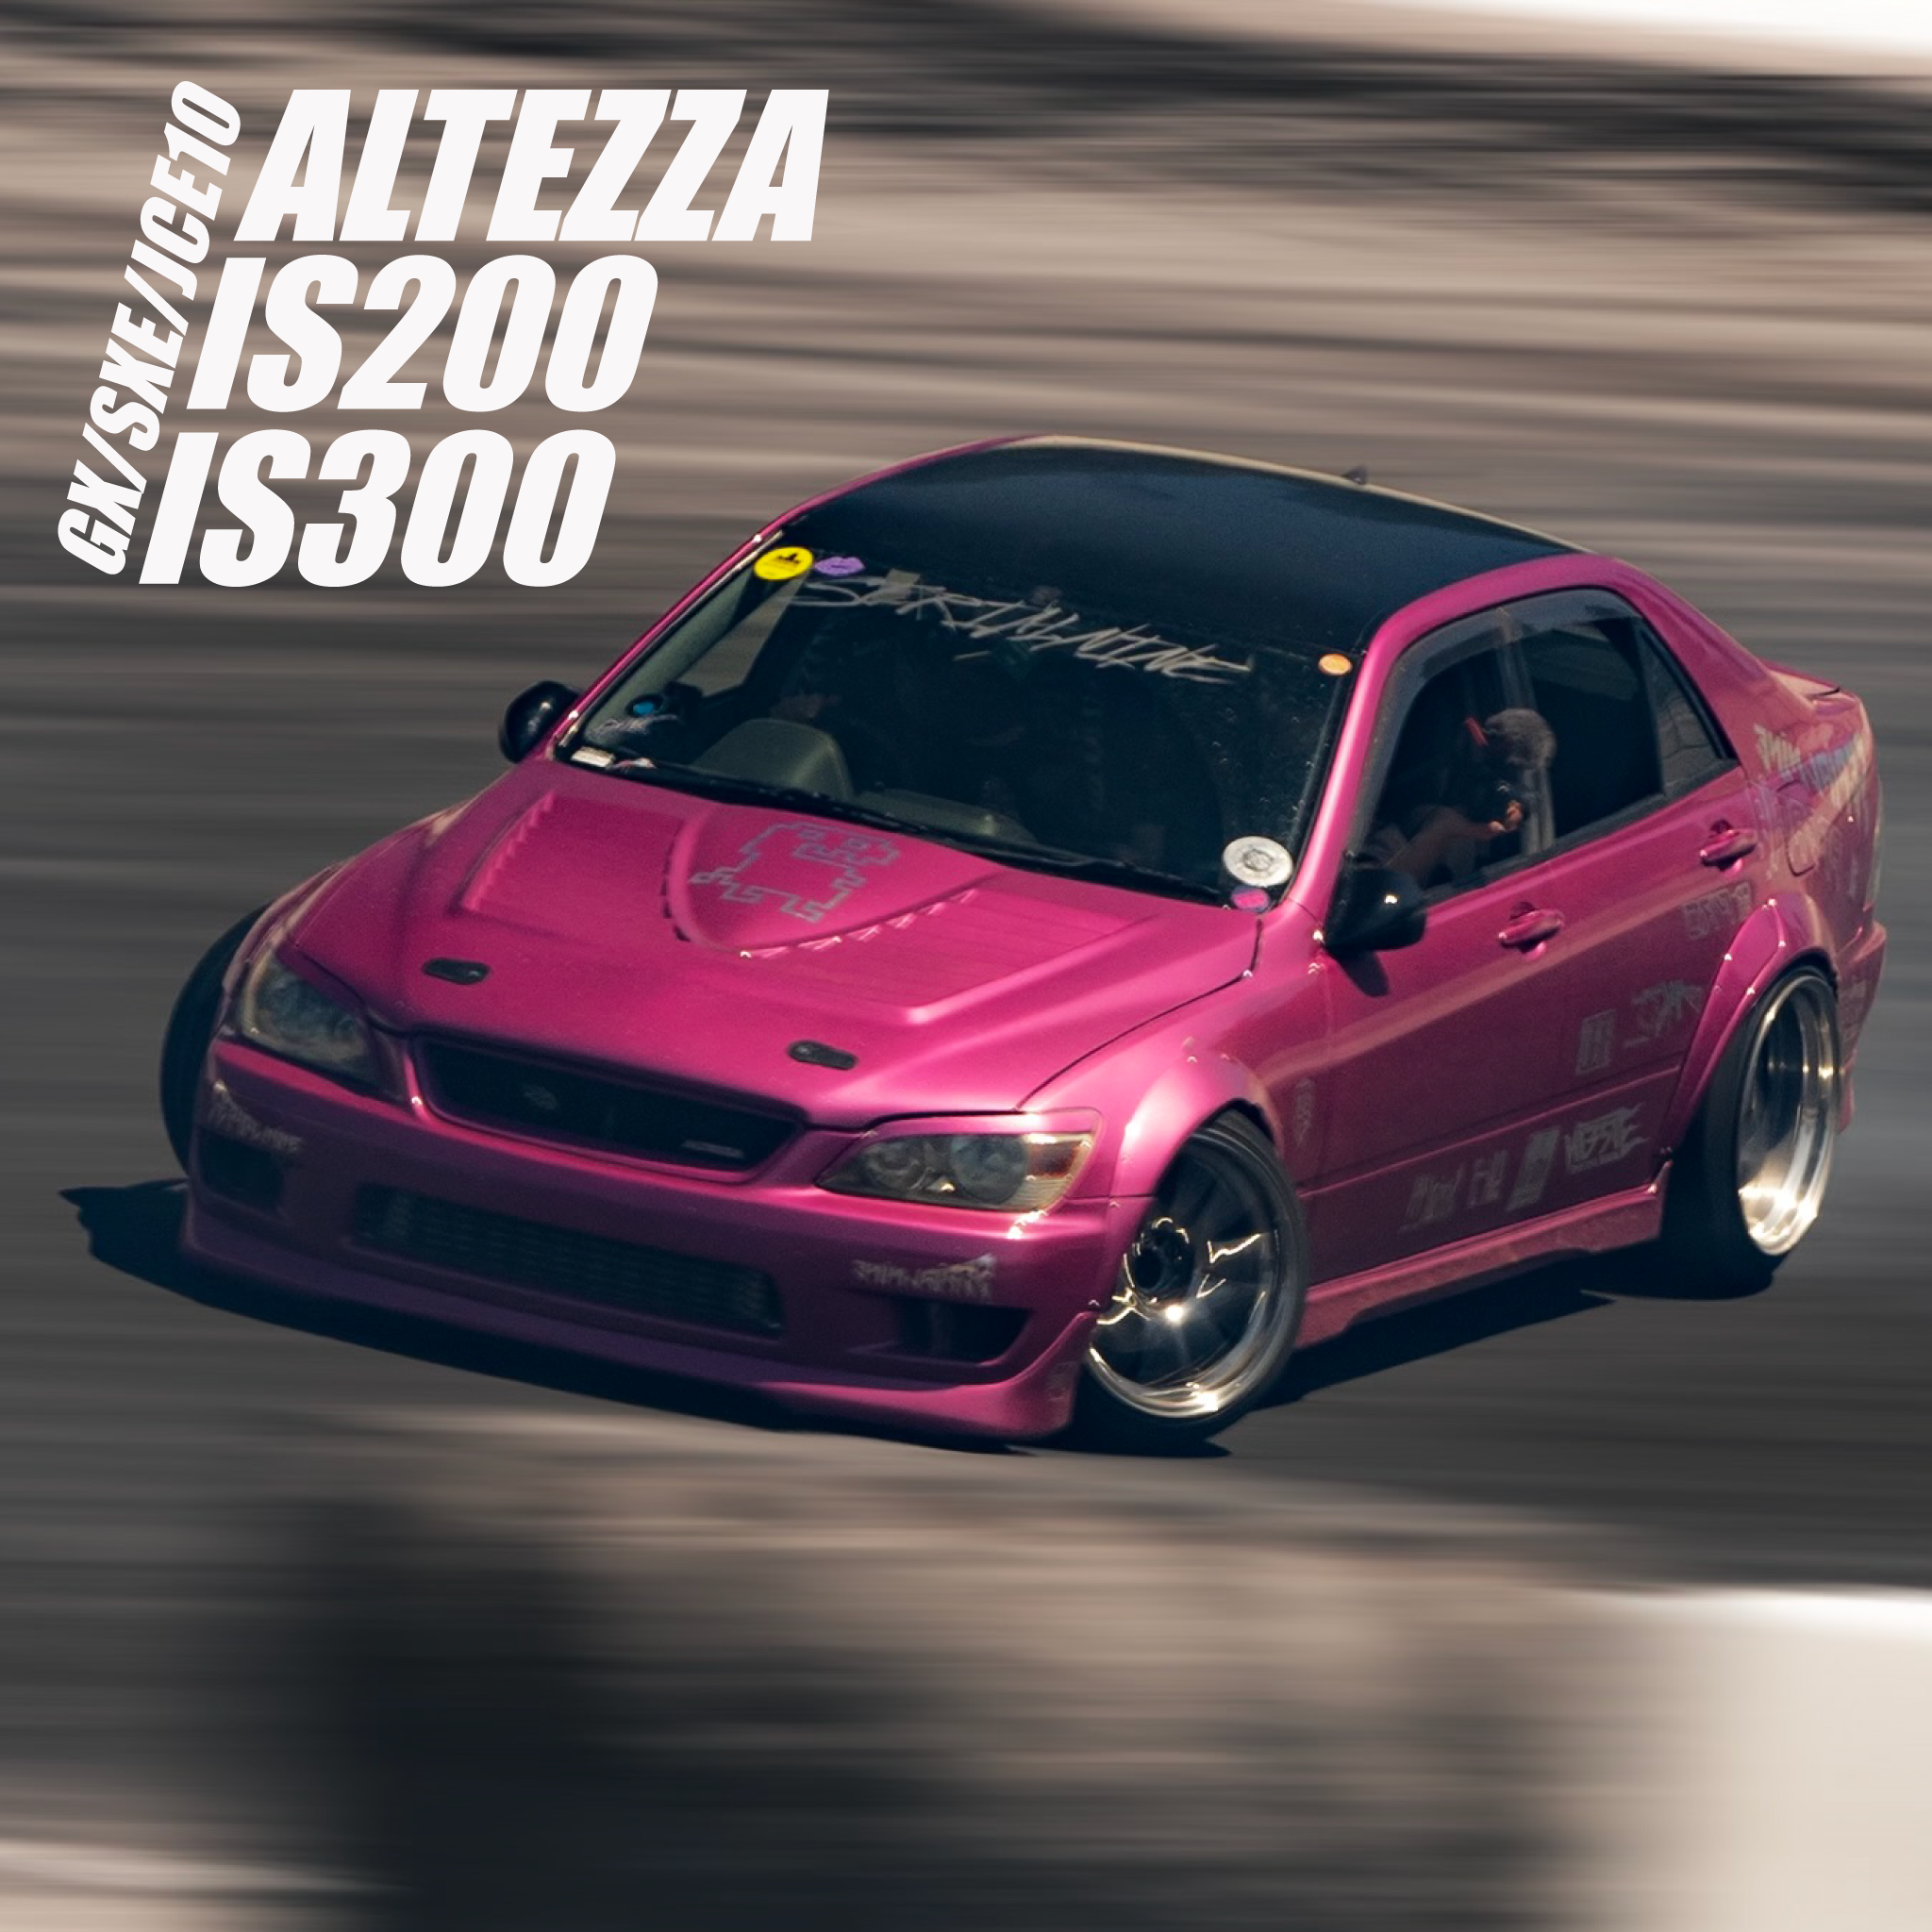 A pink Altezza IS200 or IS300 drifting on a track with 'Altezza IS200 IS300' labeled in bold white text, showcasing dynamic movement and racing style.